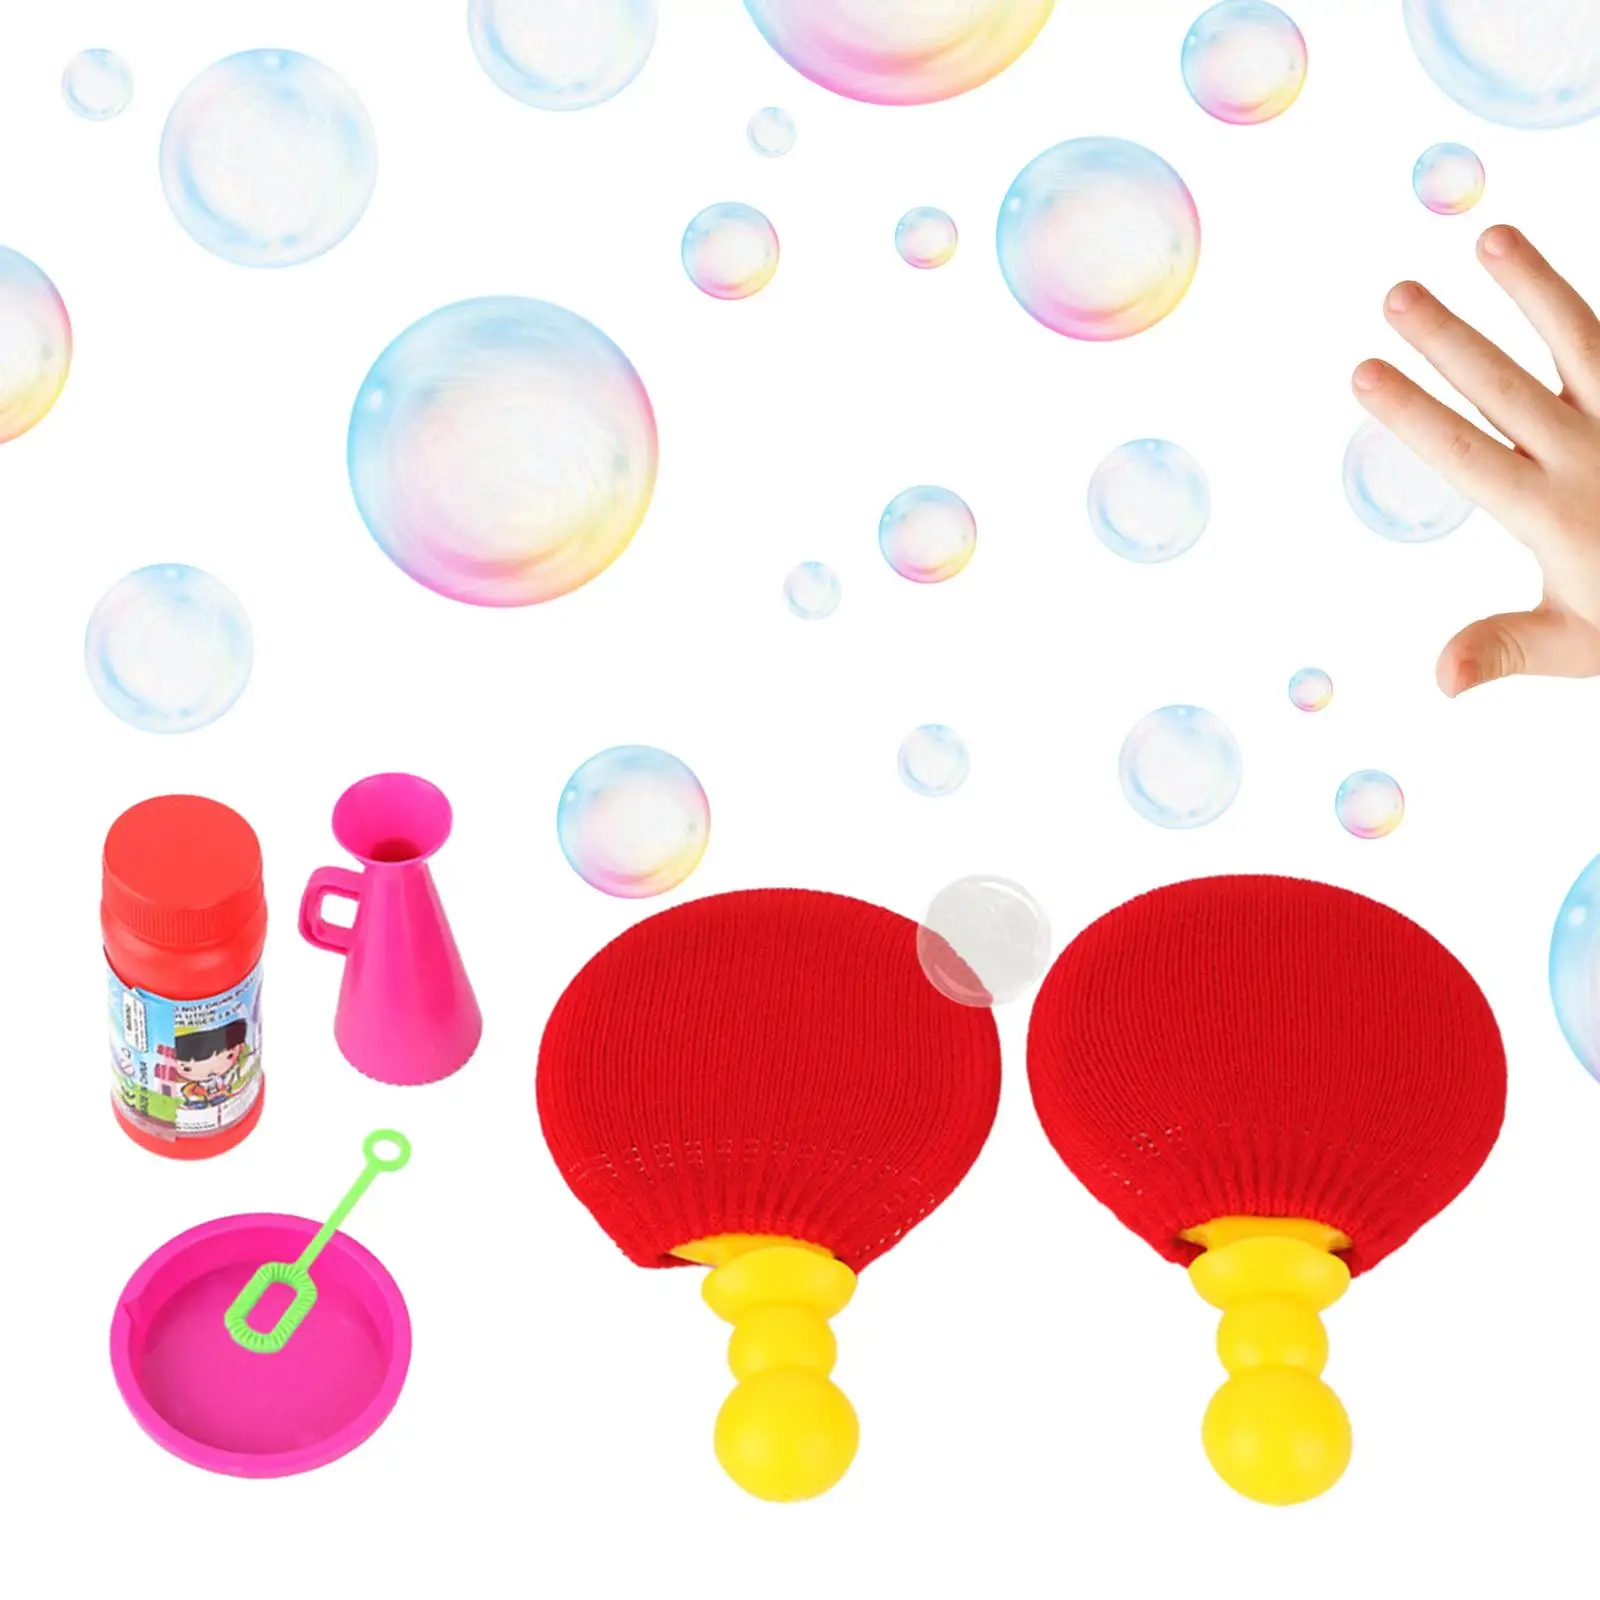 Big Bubble Maker Game Indoor and Play Ping Pong Game with Soap Bubble for Children Kids Girls Boys Party Favors